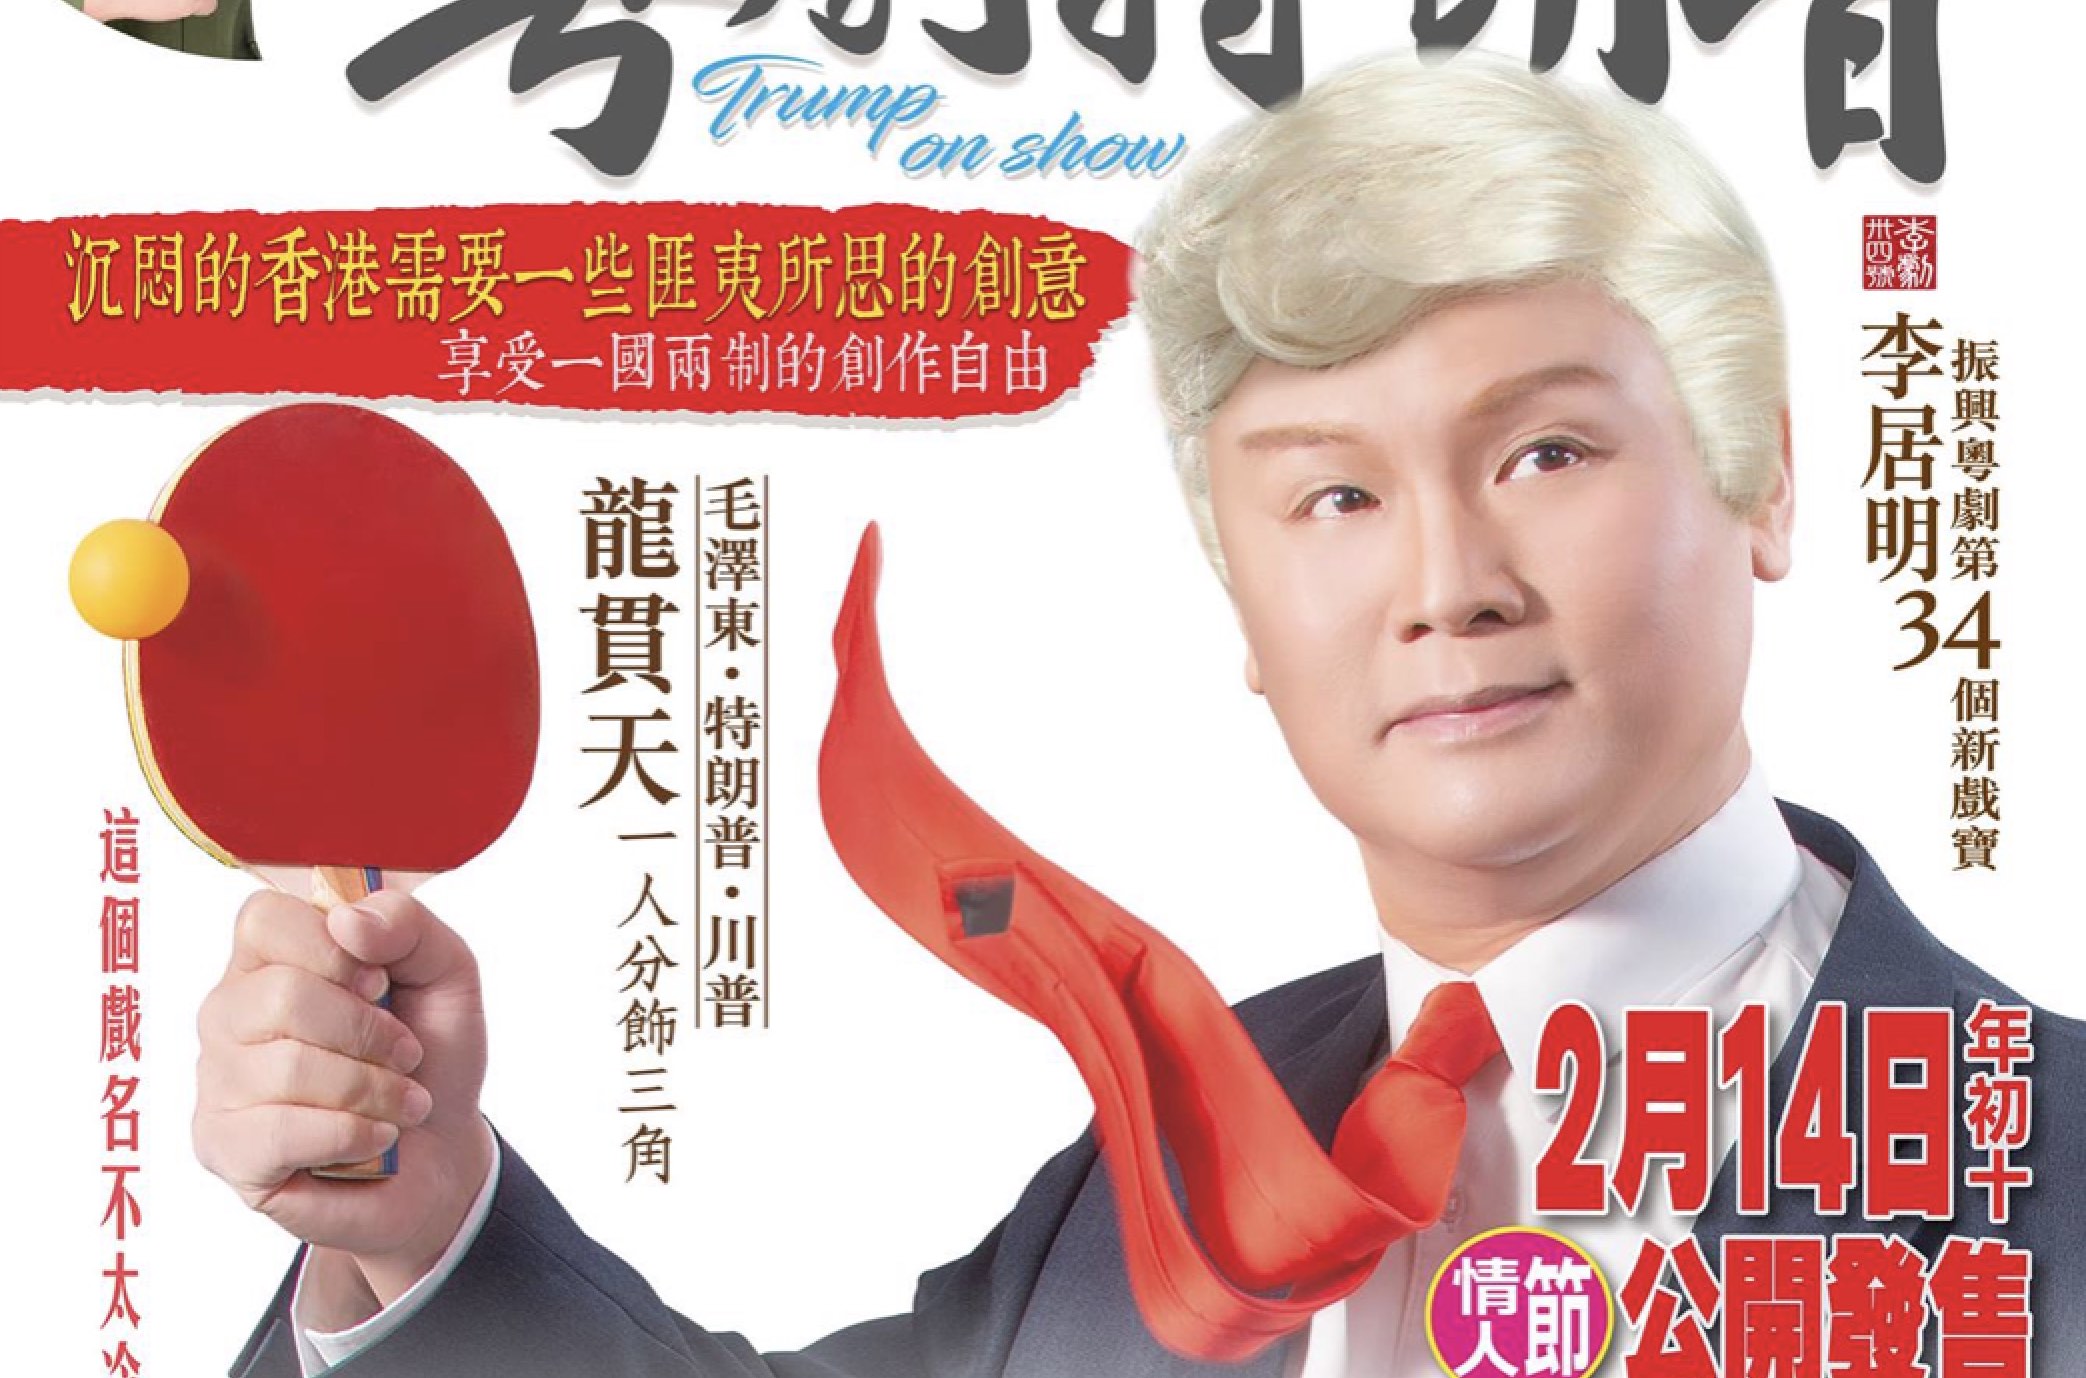 The promotional poster for a Cantonese opera about Donald Trump. Photo via Facebook/Sunbeam Theatre.